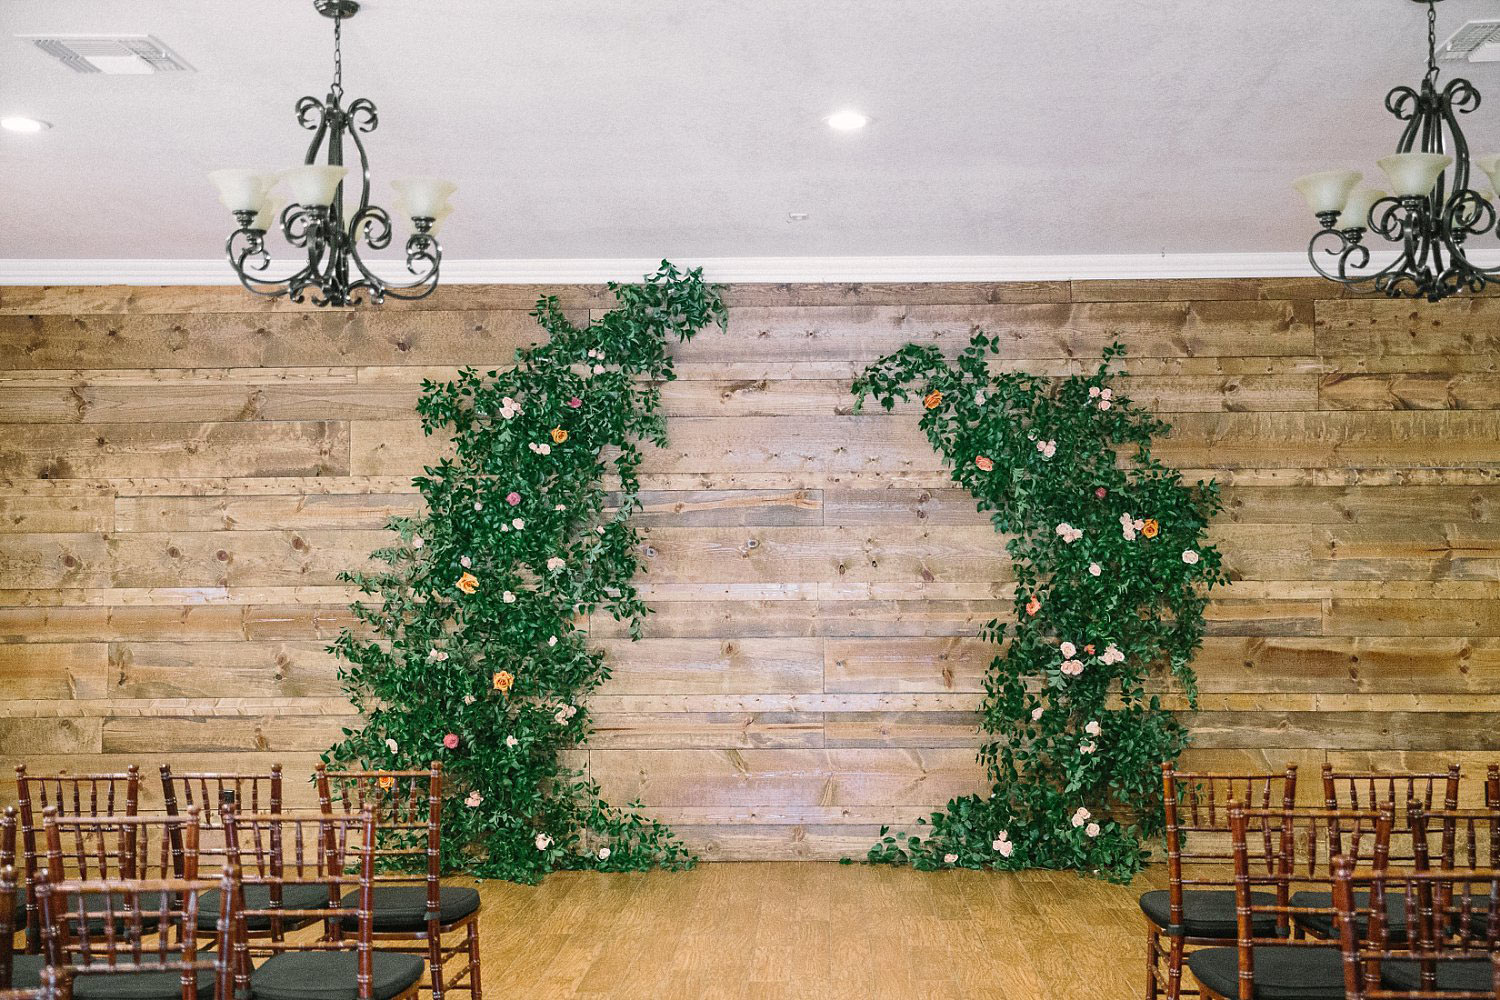 Indoor wedding ceremony at the Orchard in Azle TX